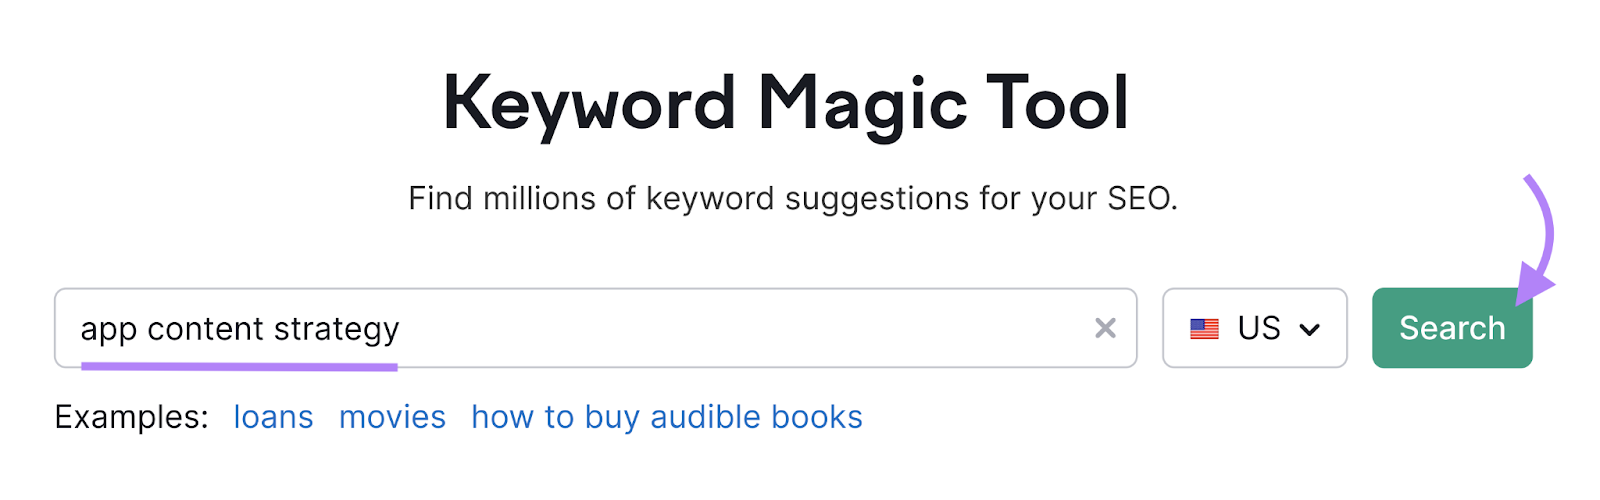 app content strategy is entered into keyword magic tool